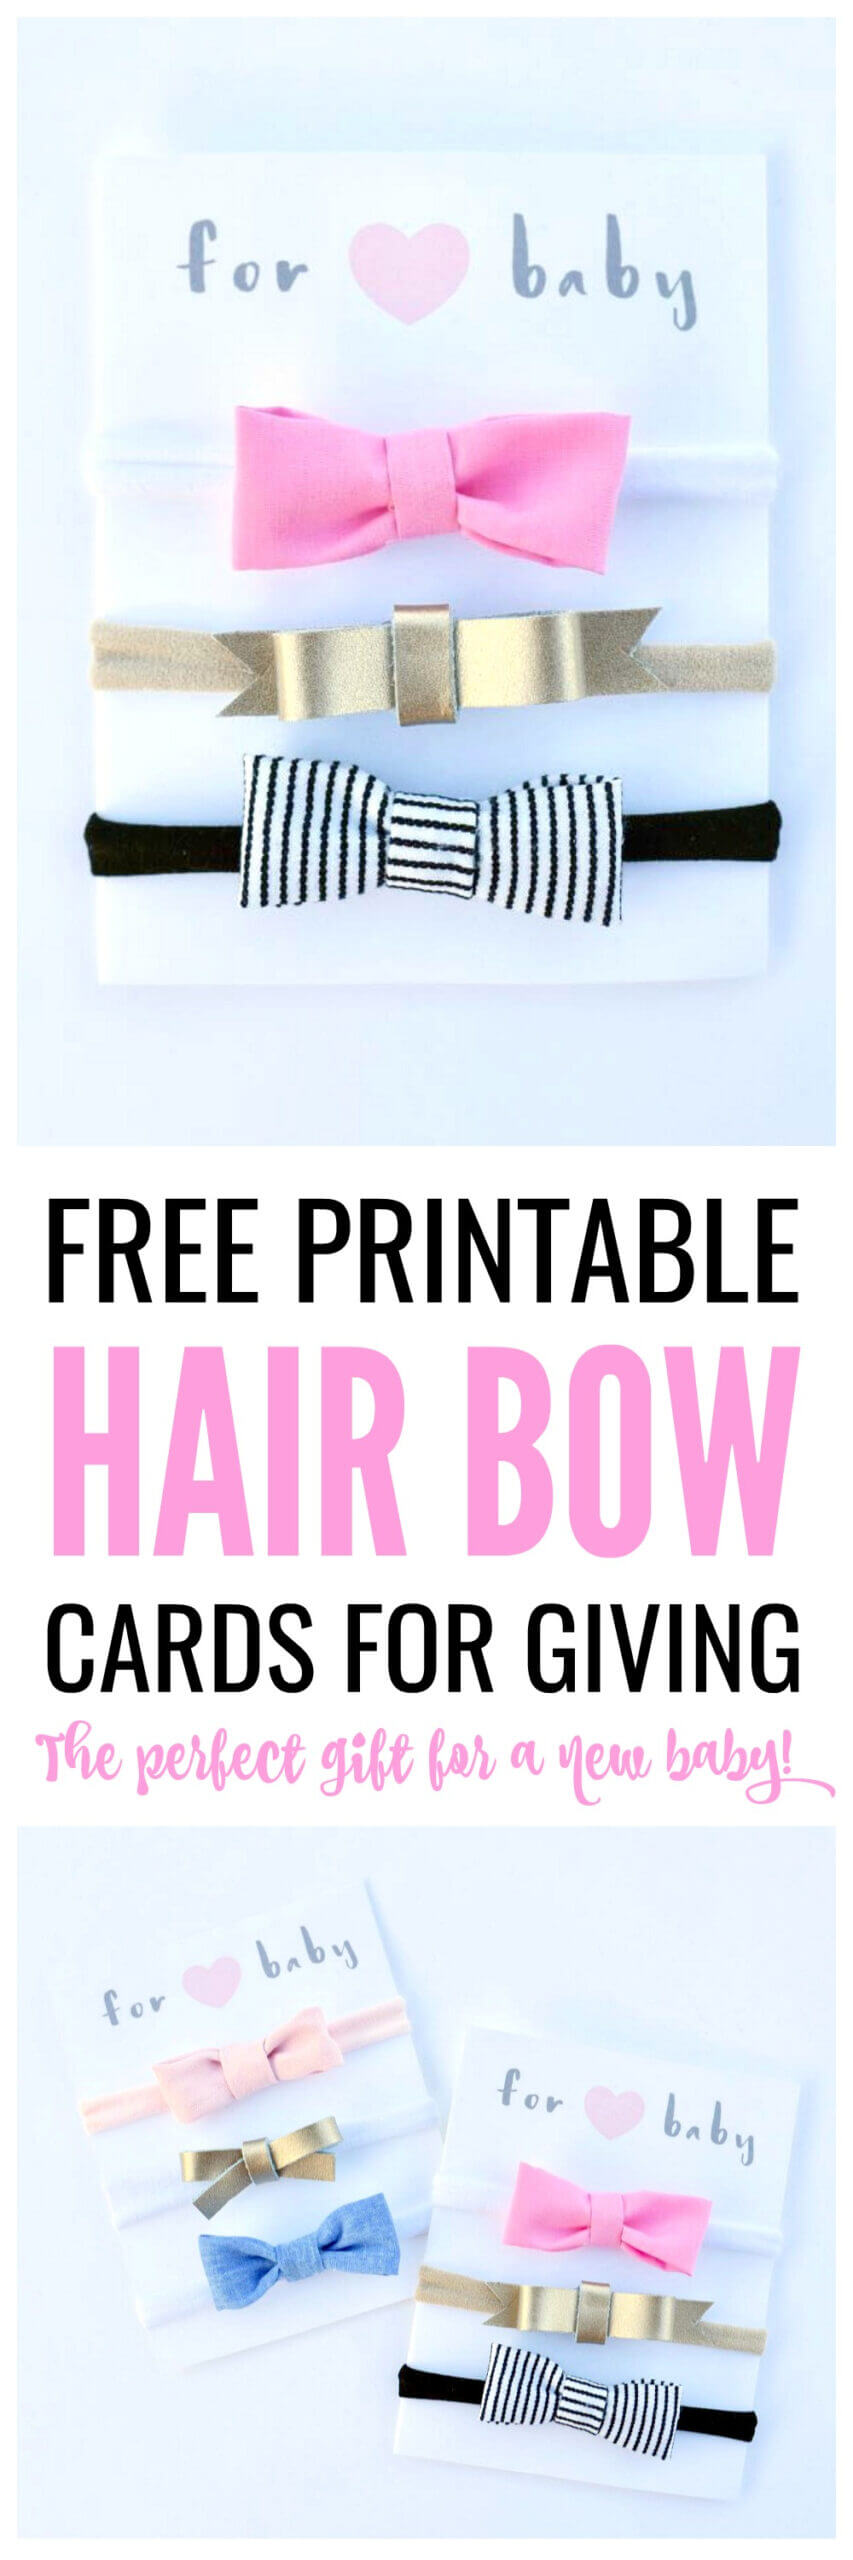 Free Printable Hair Bow Cards For Diy Hair Bows And With Regard To Headband Card Template